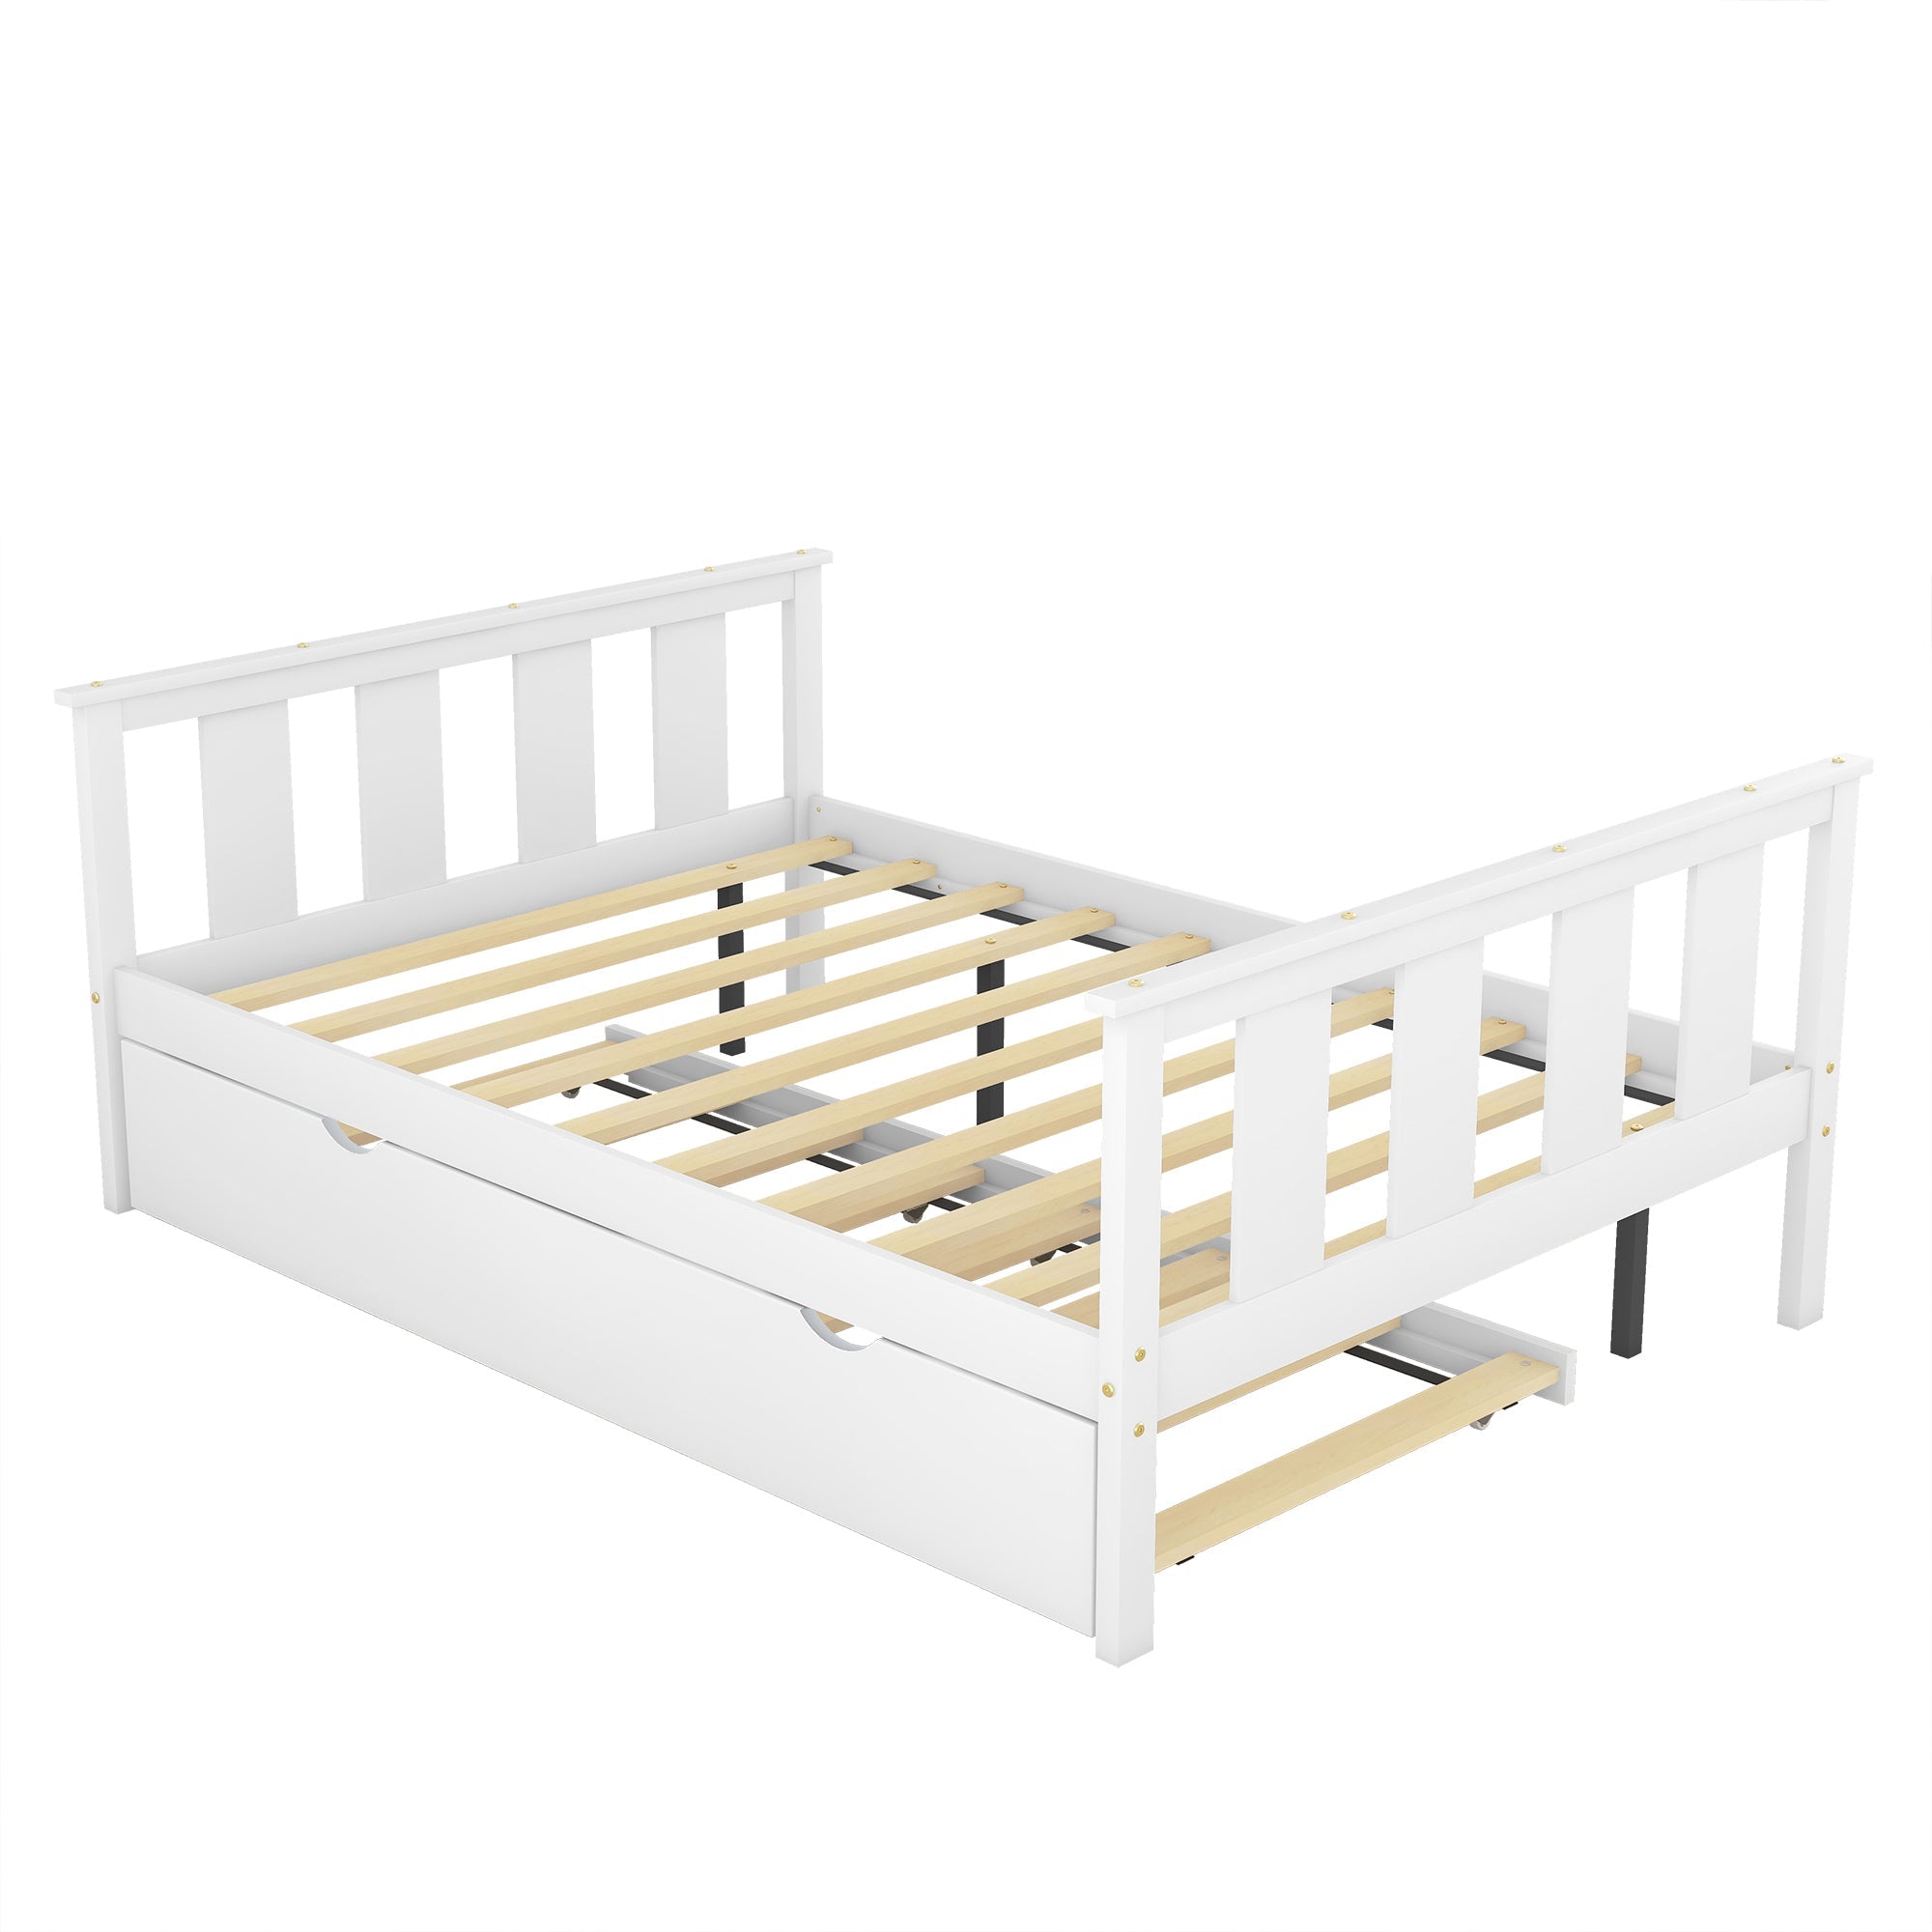 BTMWAY Full Bed with Trundle, Modern Full Size Solid Wood Platform Bed Frame with Headboard, Footboard and Trundle Included, No Box Spring Needed, Trundle Bed for Kids Teens Adults, White